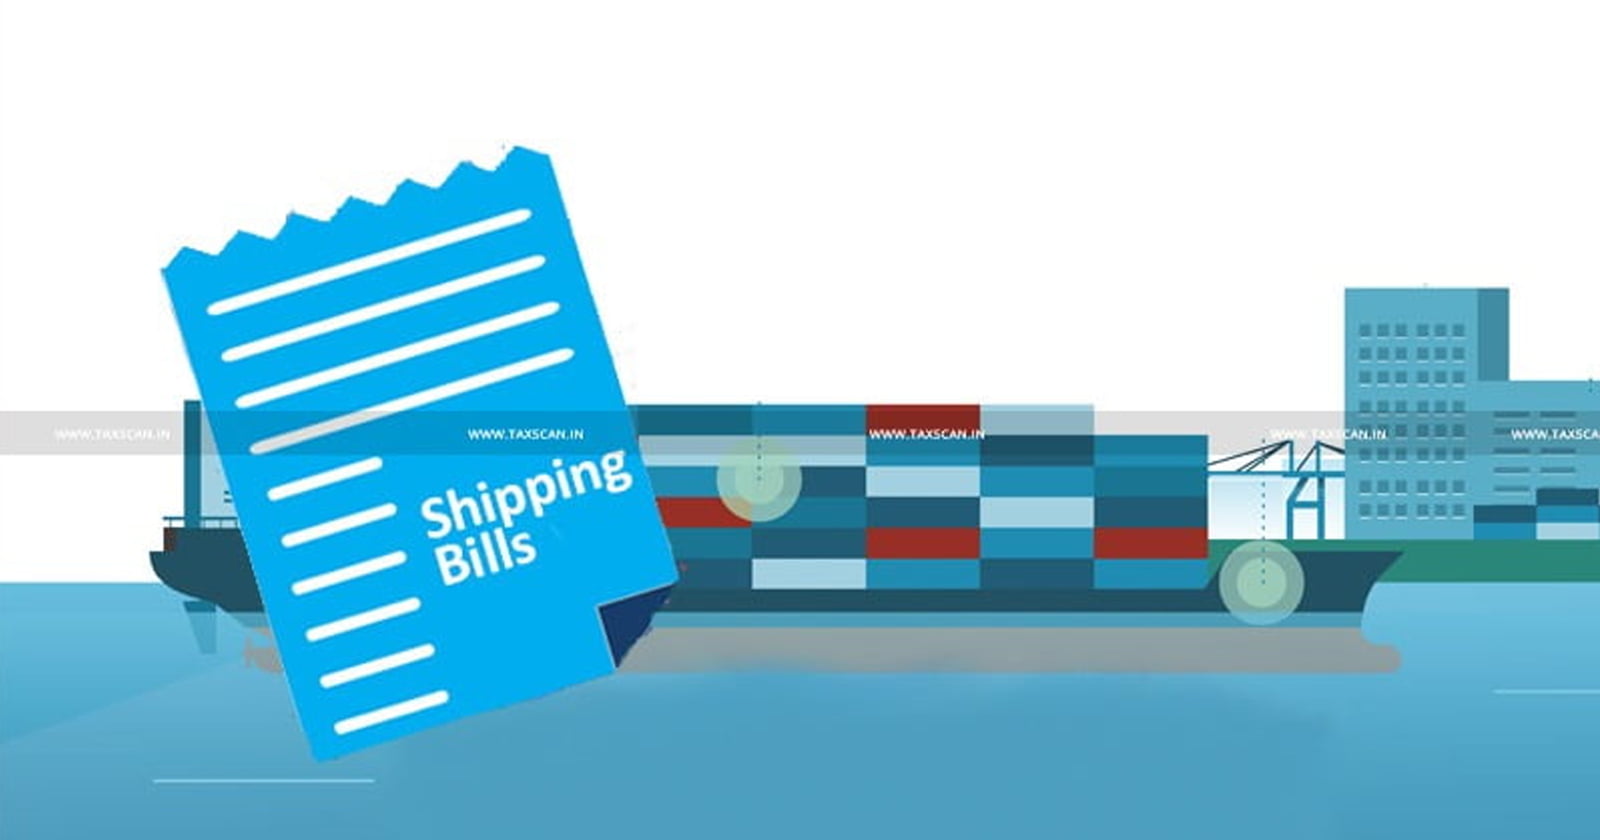 CBIC issues Circular Implementing Ex - Bond Shipping Bill in Indian Customs EDI System - TAXSCAN